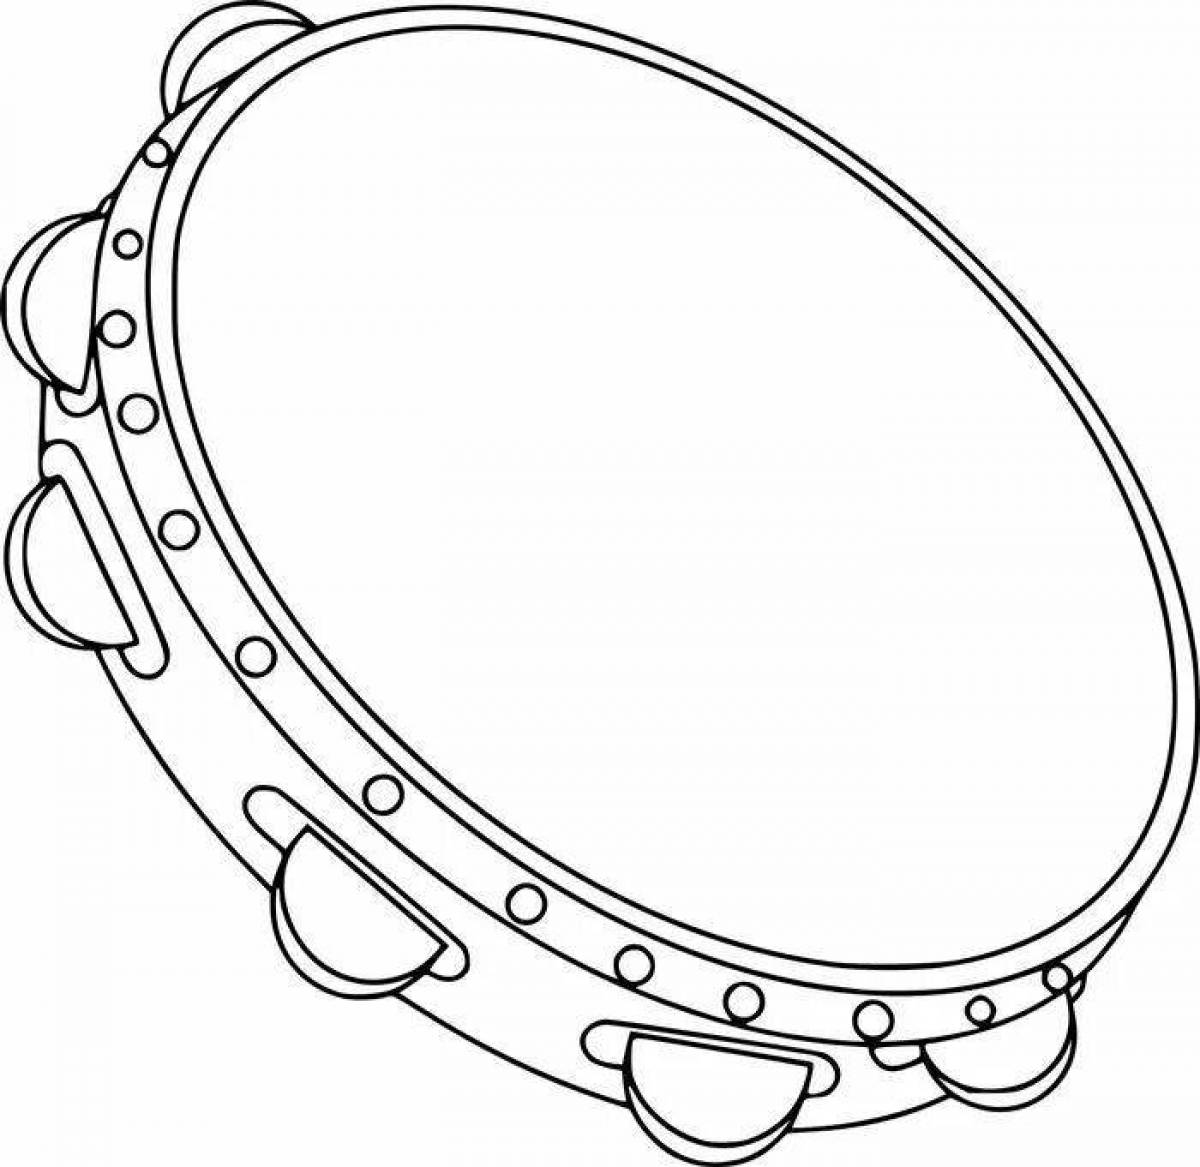 Animated tambourine coloring page